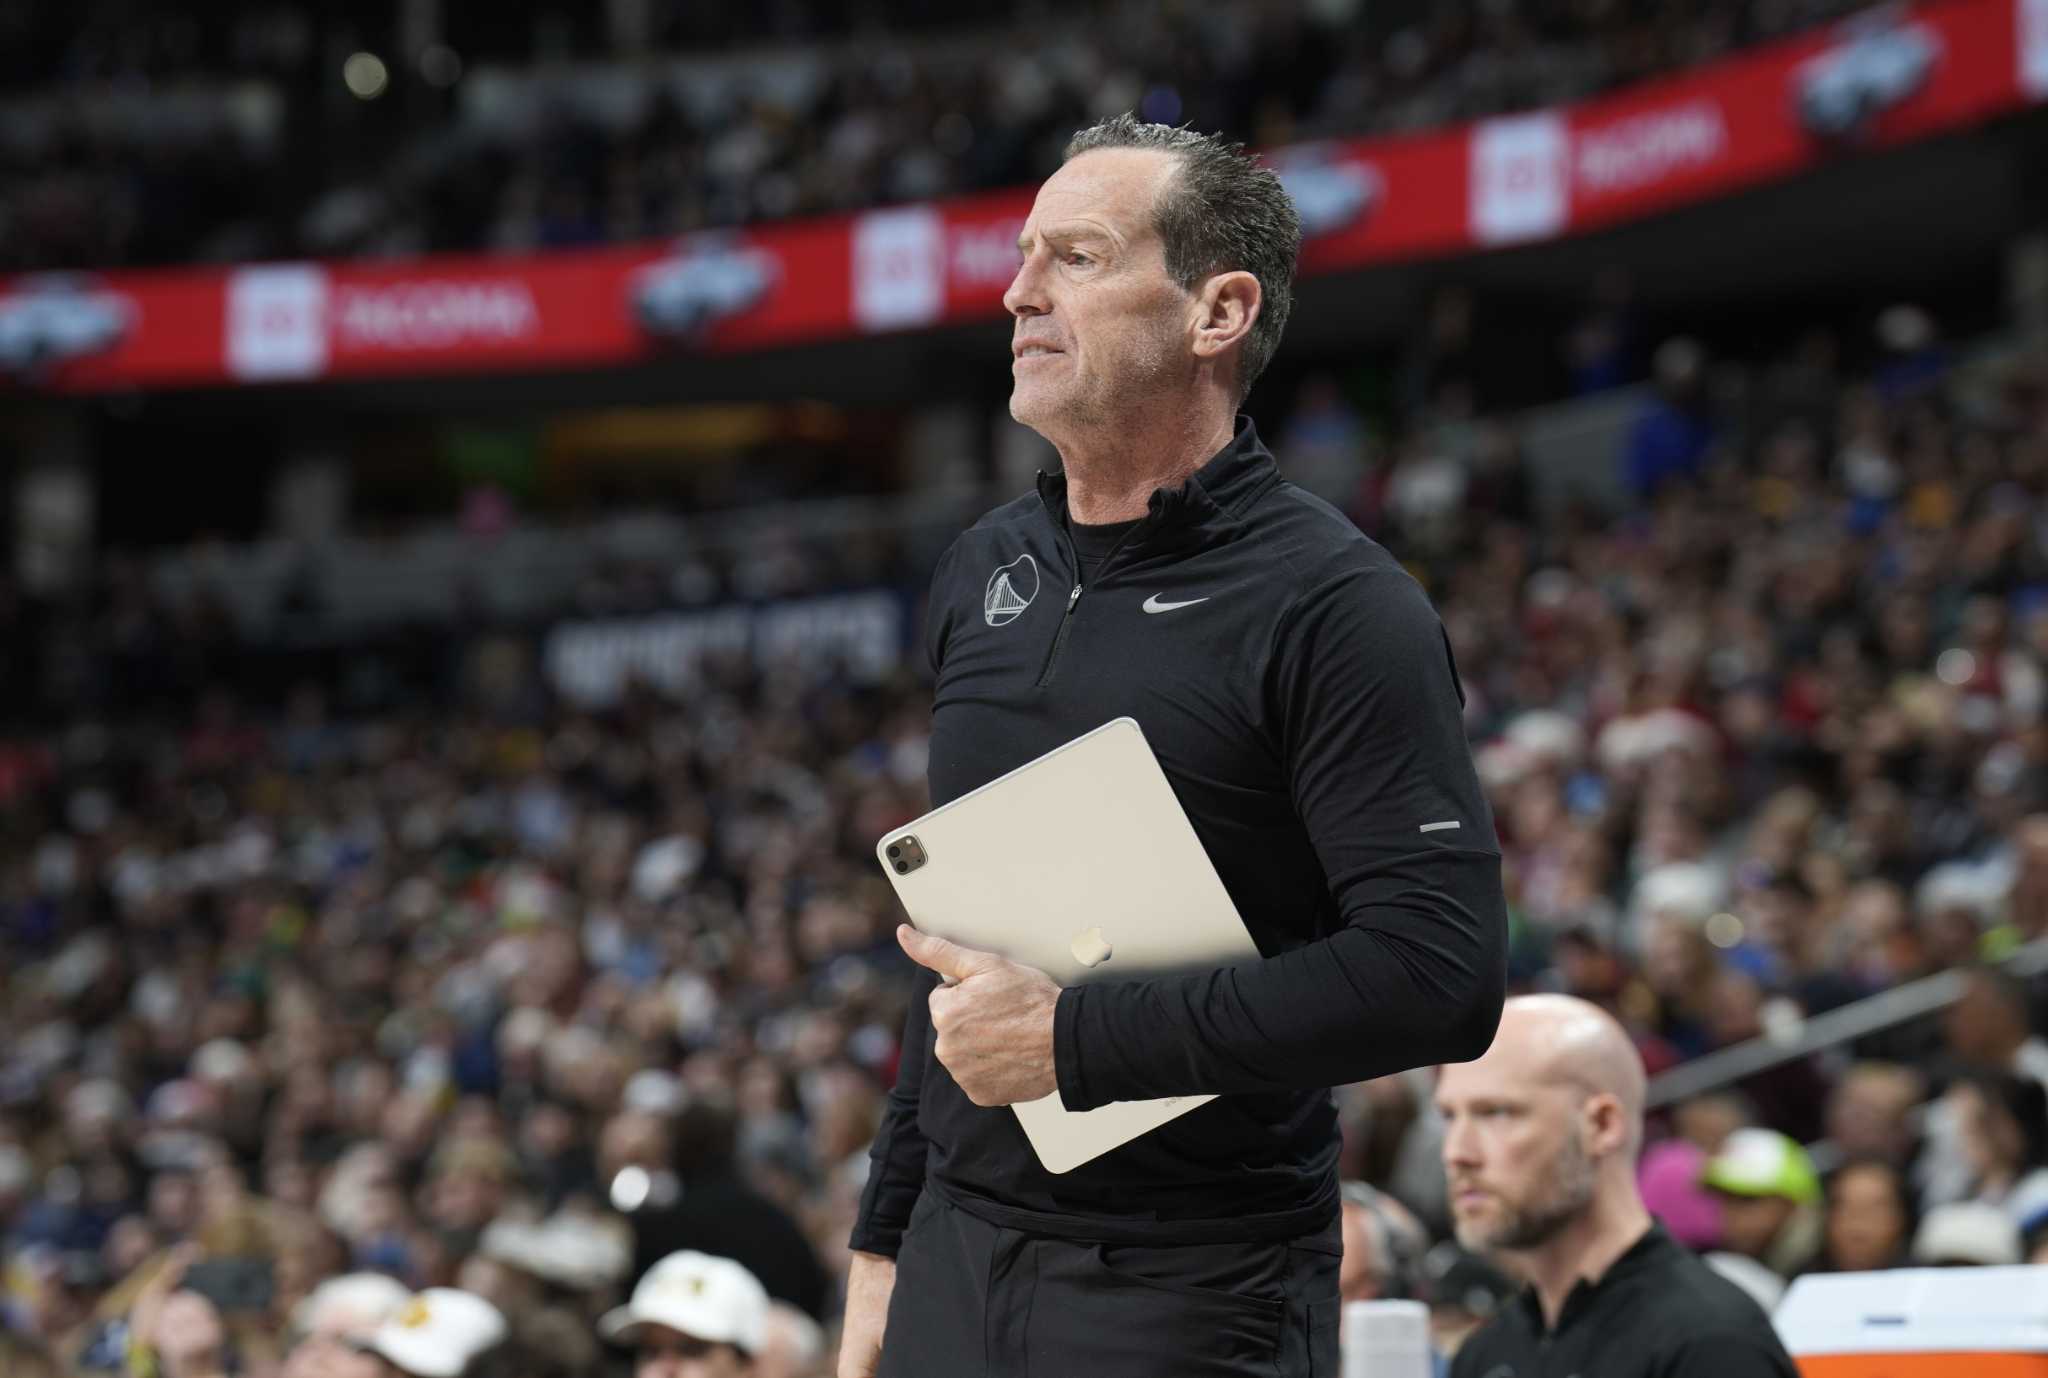 Cavaliers get permission to interview assistants Atkinson, Borrego for coaching vacancy, source says